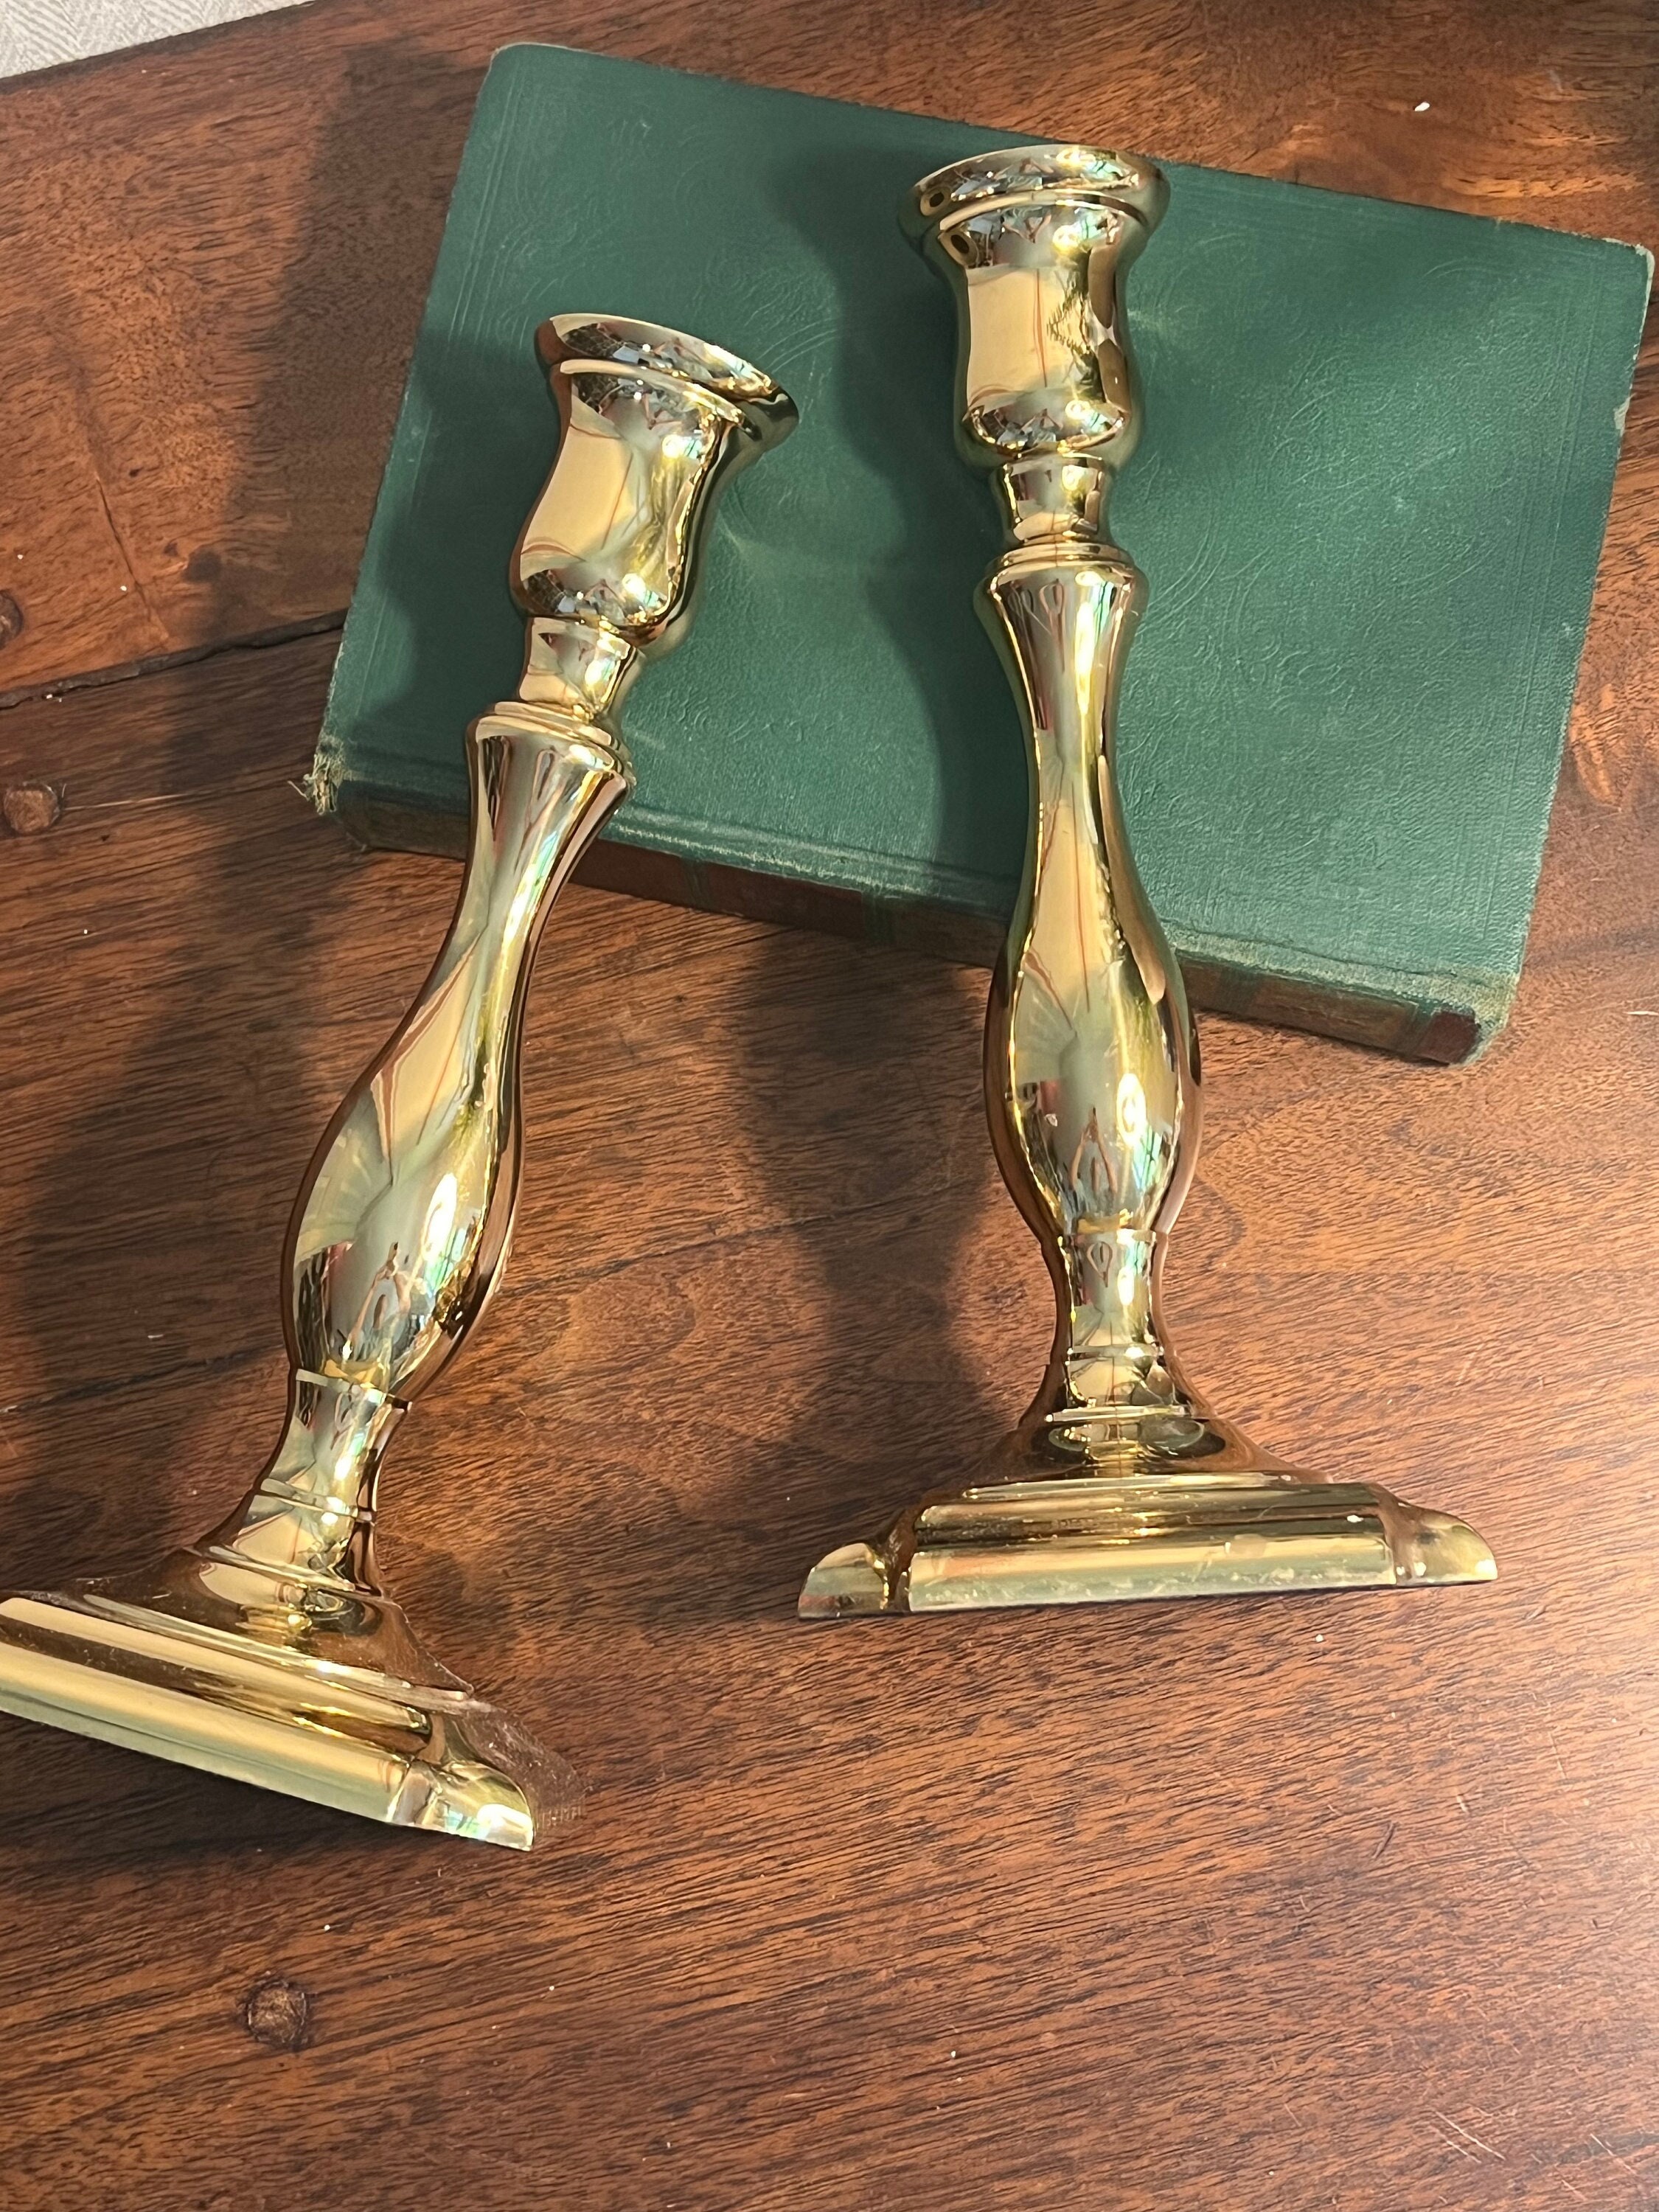 Set of 2/Matching Vintage Solid Brass 9.25 Tall Candlestick Holders ~  Mid-Century Shiny Brass Decor ~ Farmhouse Mantle Fireplace Decor